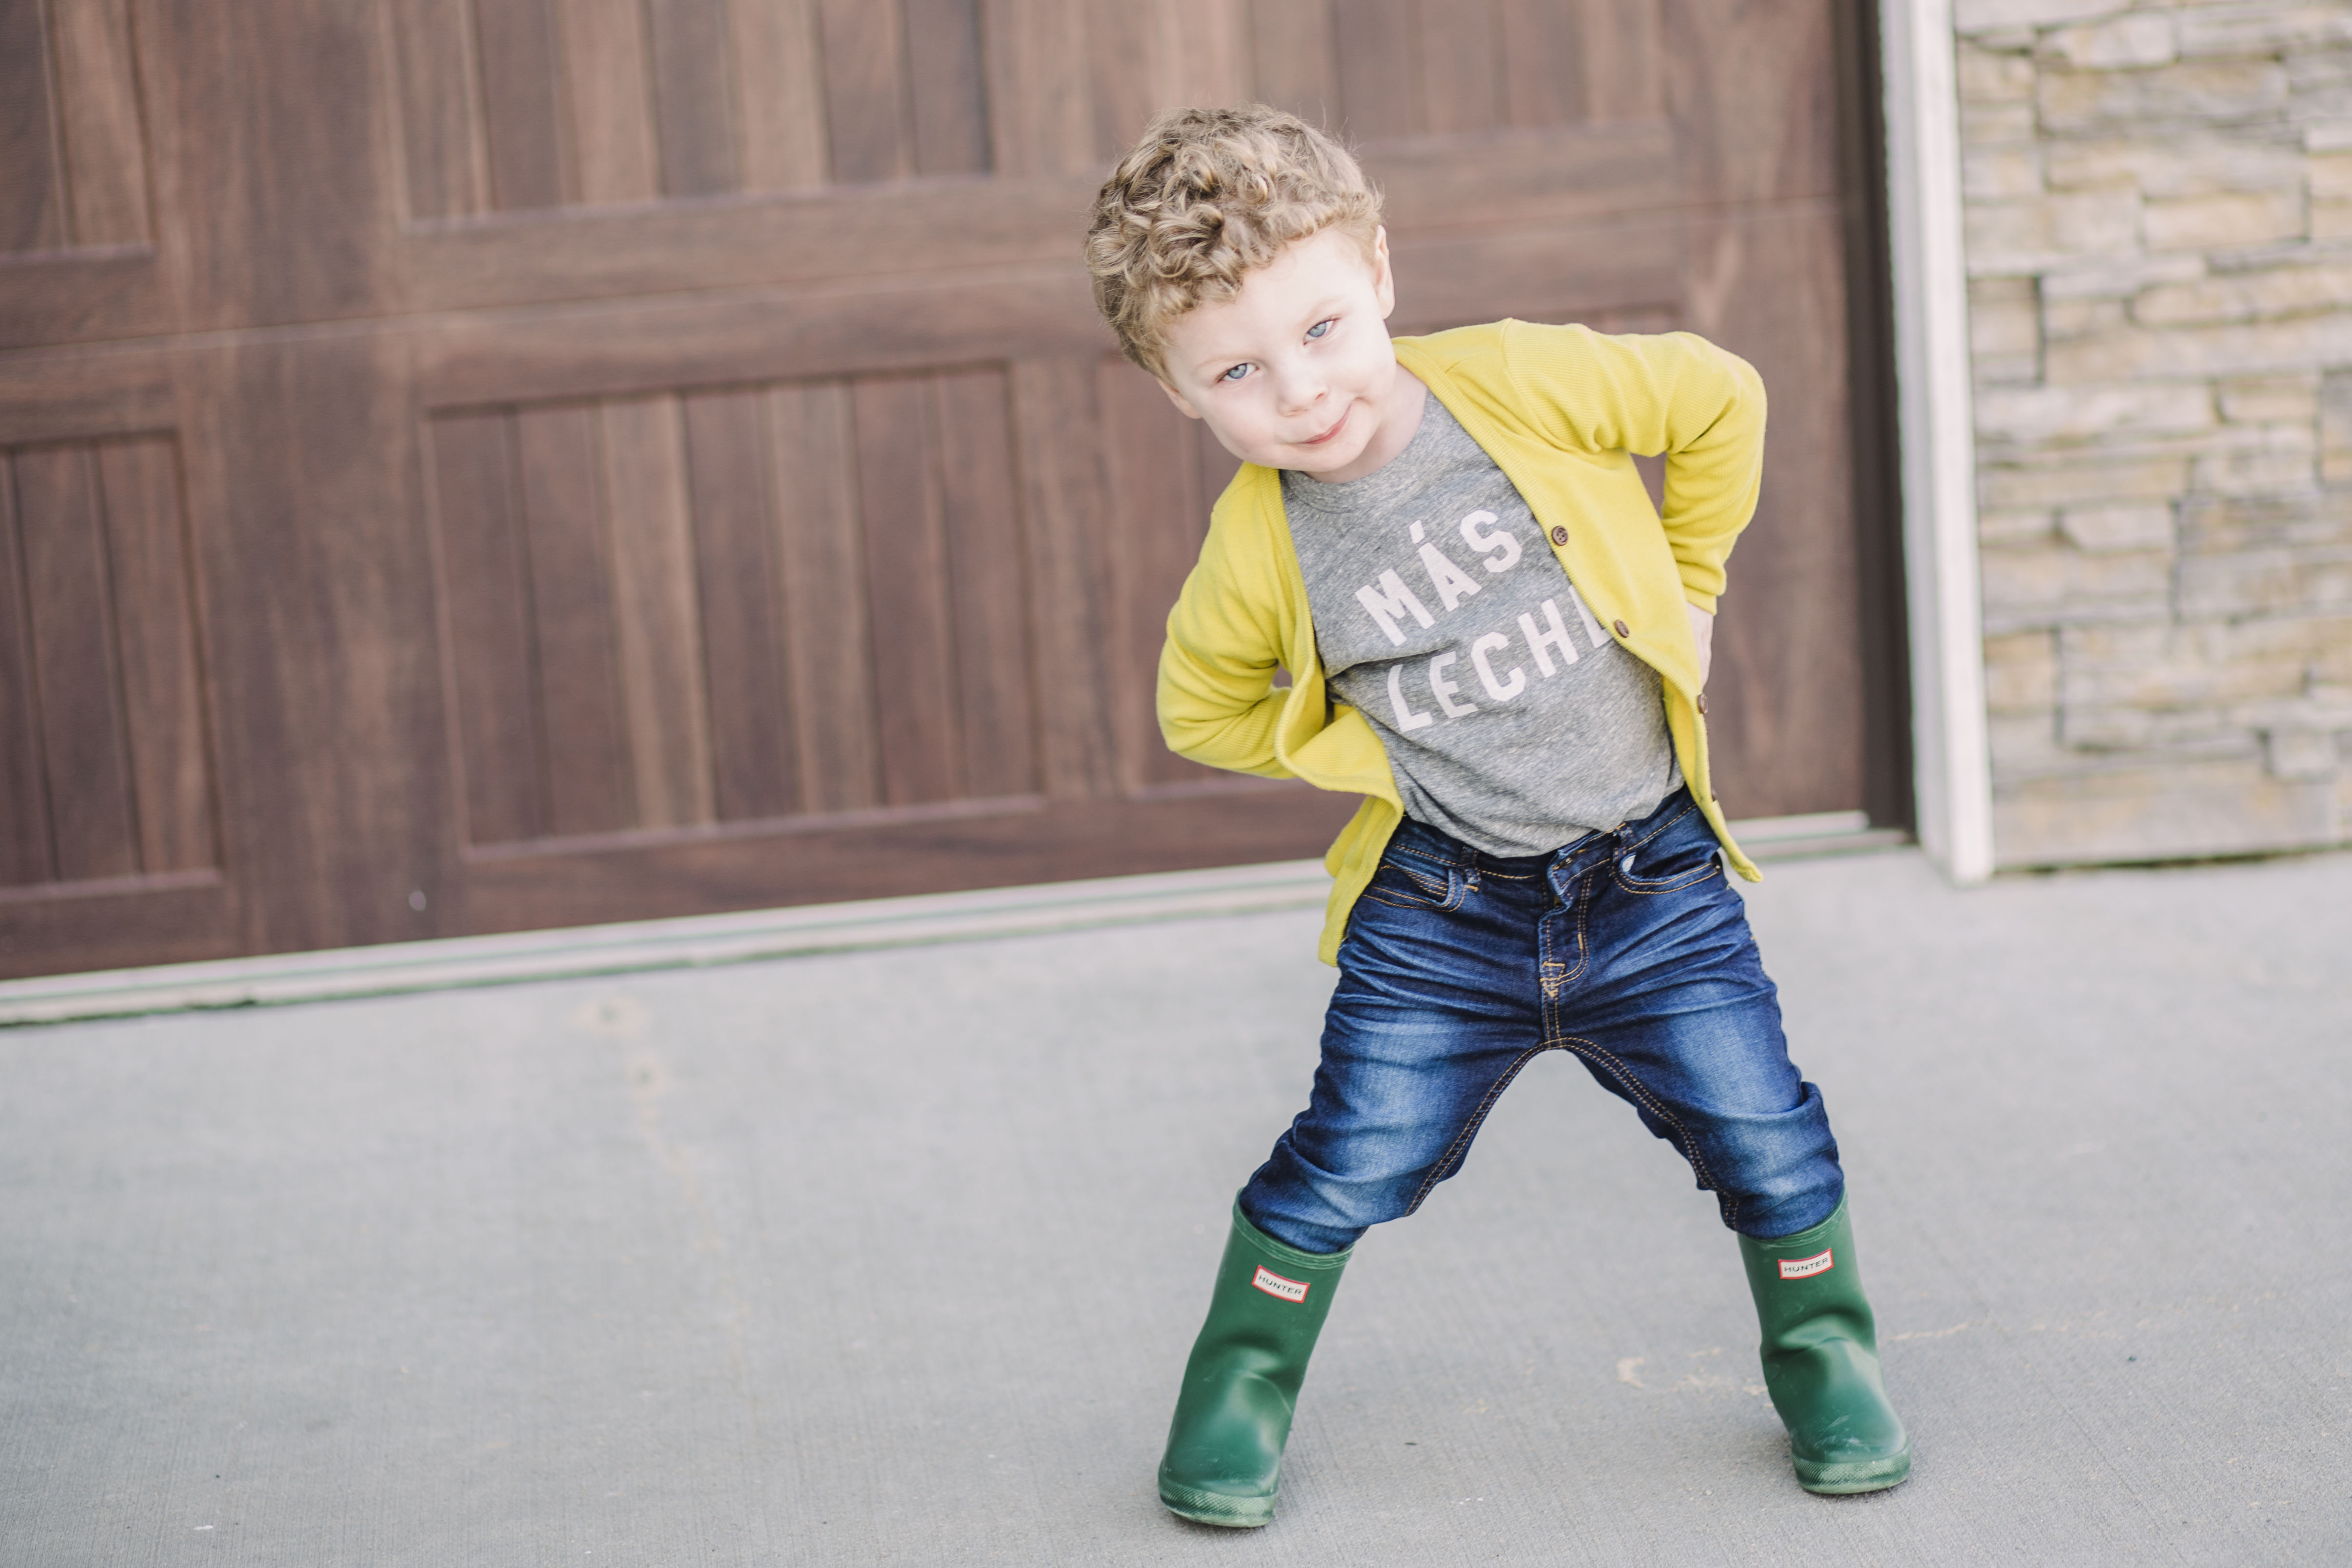 tips + resources for dressing boys | www.29thanddelight.com